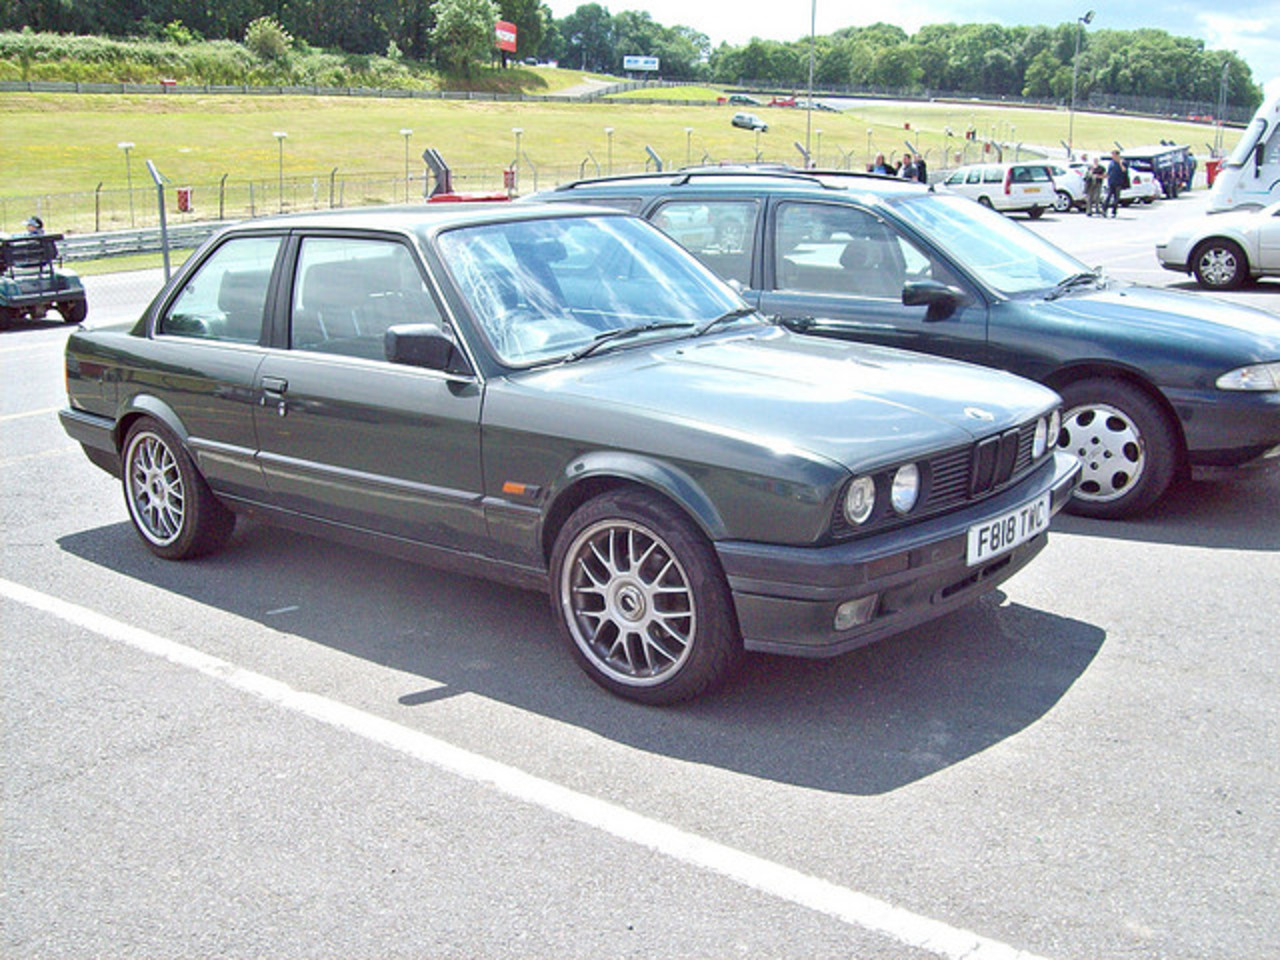 23 BMW 325is E30 2d (1989) | Flickr - Photo Sharing!